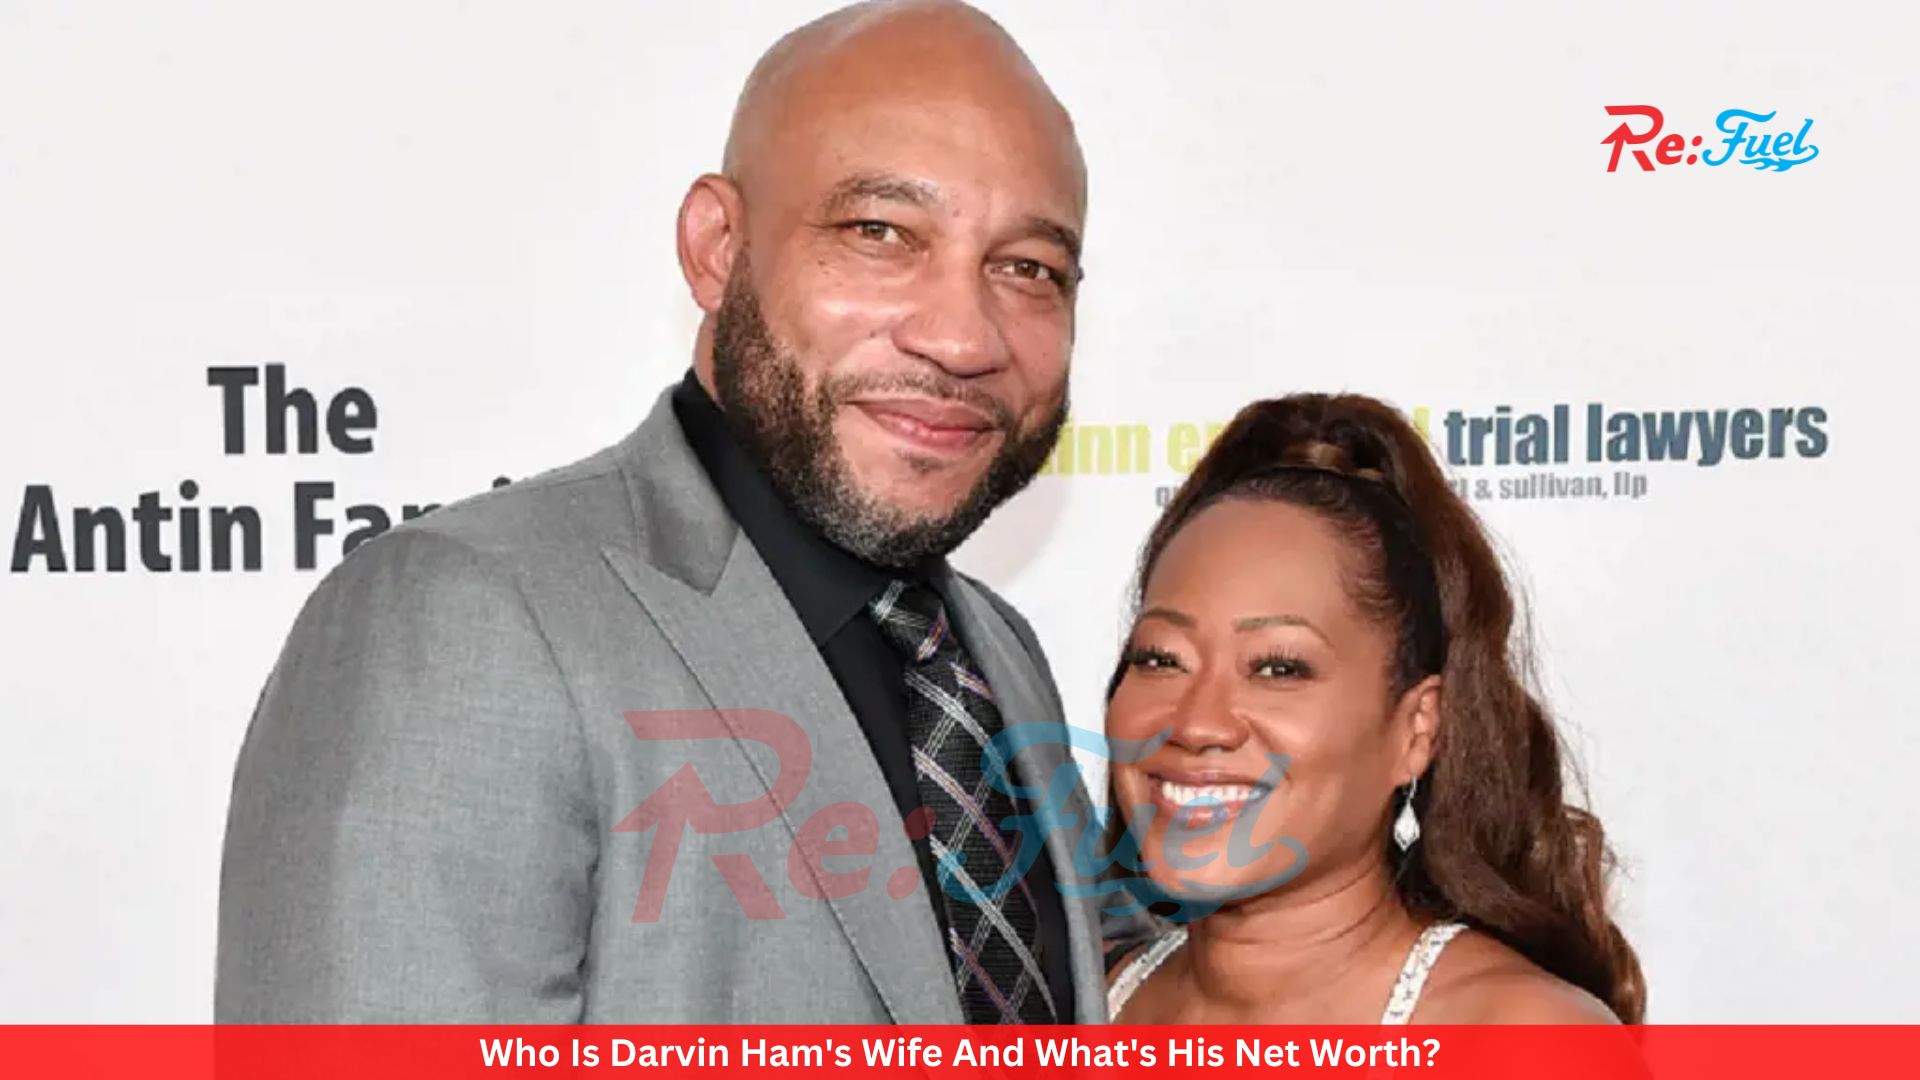 Who Is Darvin Ham's Wife And What's His Net Worth?